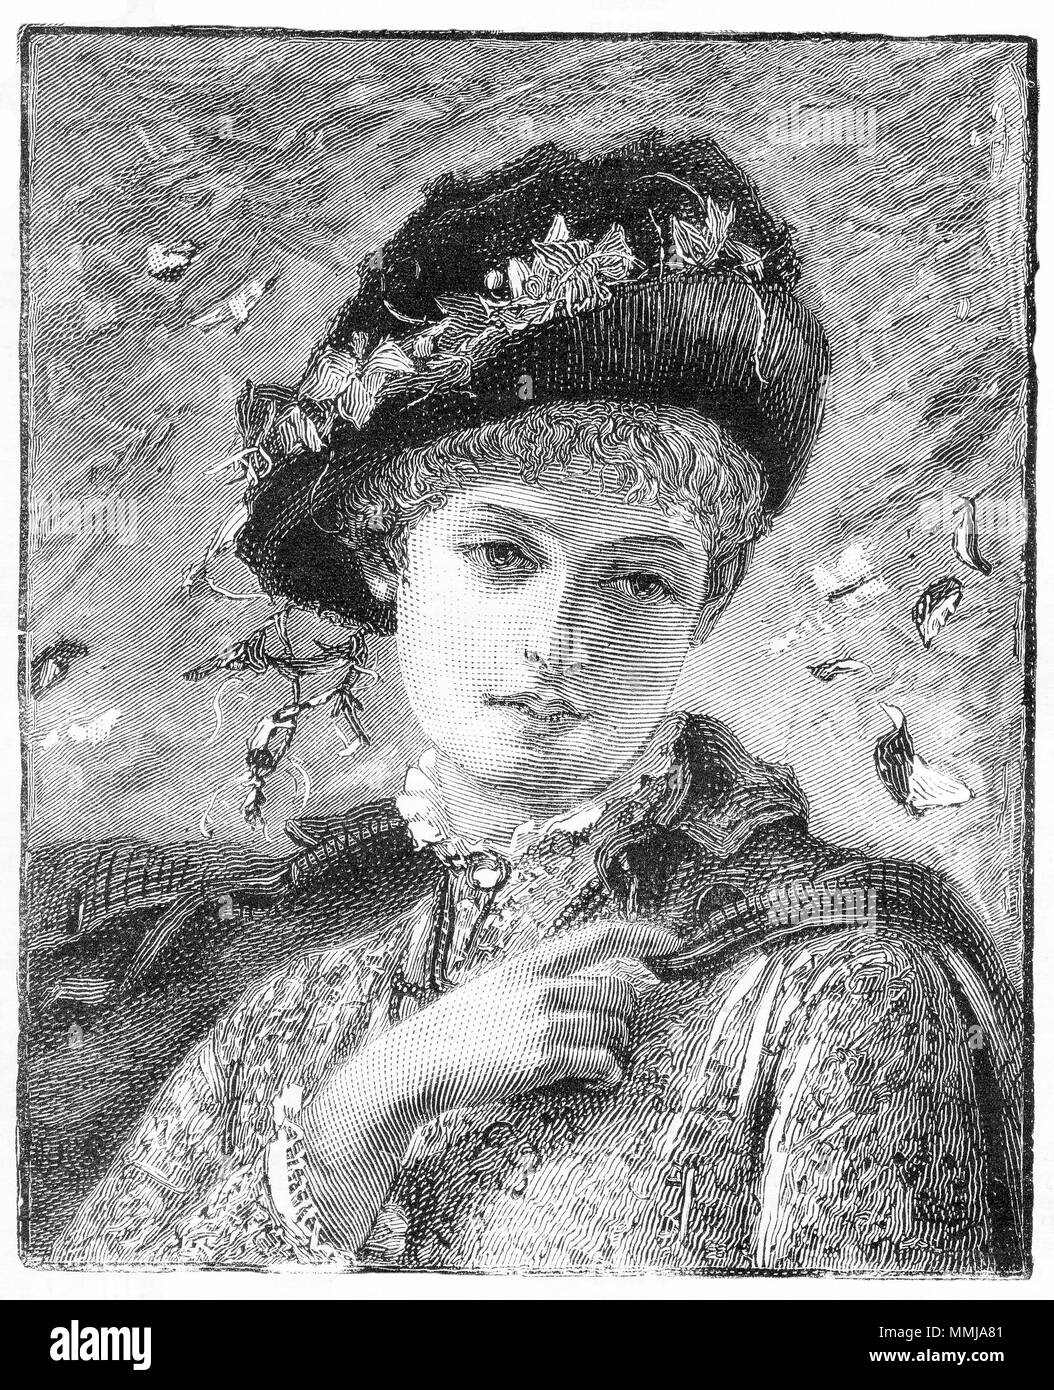 Engraving of a winsome young woman in Victorian dress. From an original engraving in the Girl's Own Paper magazine 1882. Stock Photo